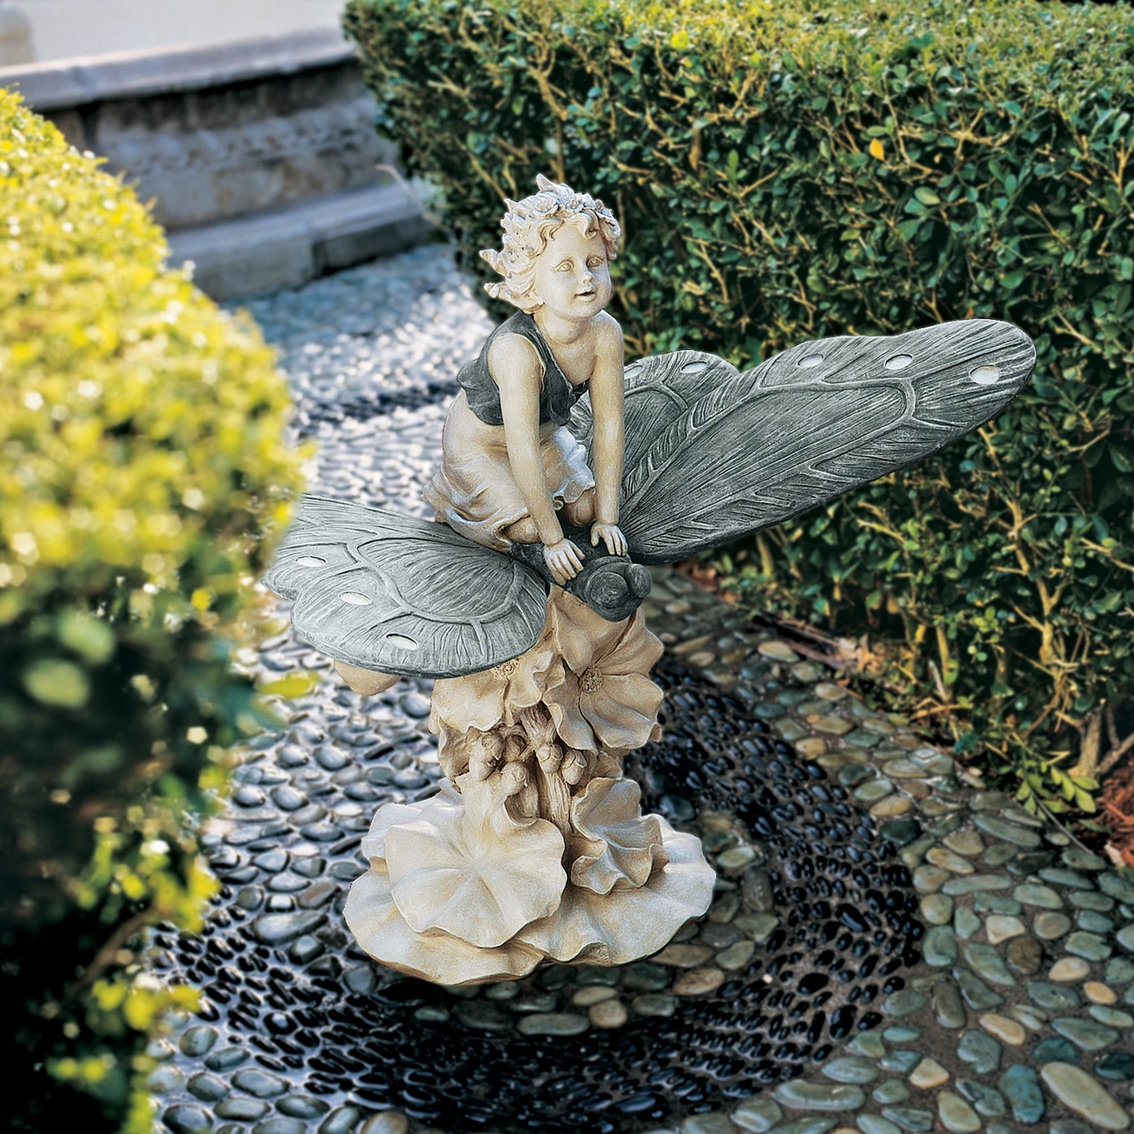 Design Toscano A Fairy's Wondrous Butterfly Ride Statue - Image 4 of 4